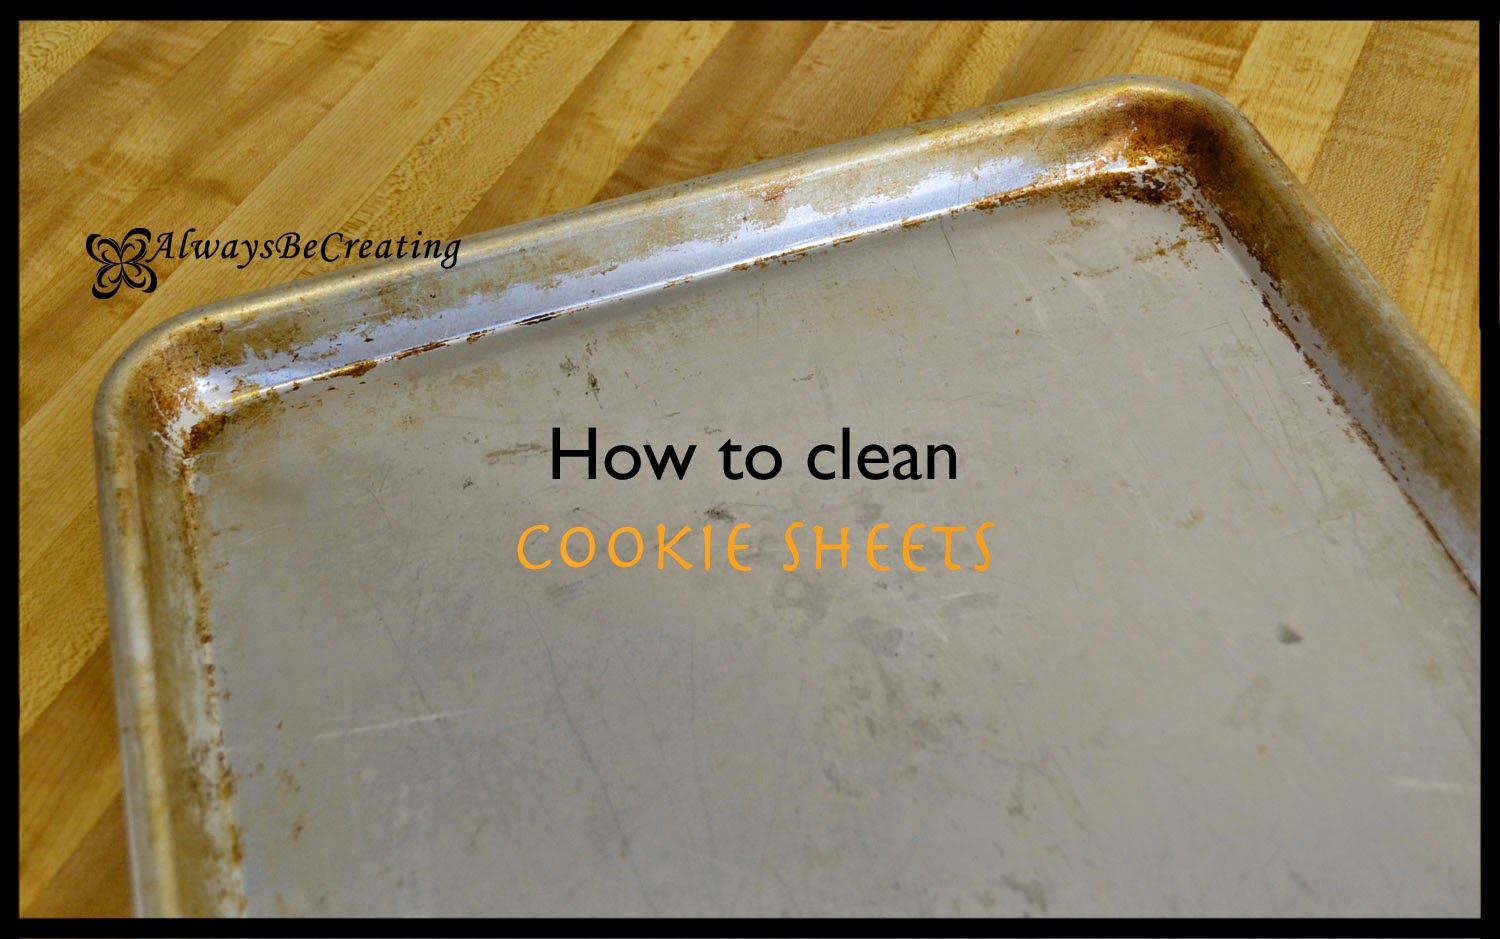 http://49fifty.weebly.com/1/post/2014/03/cleaning-the-gunk-off-of-cookie-sheets.html